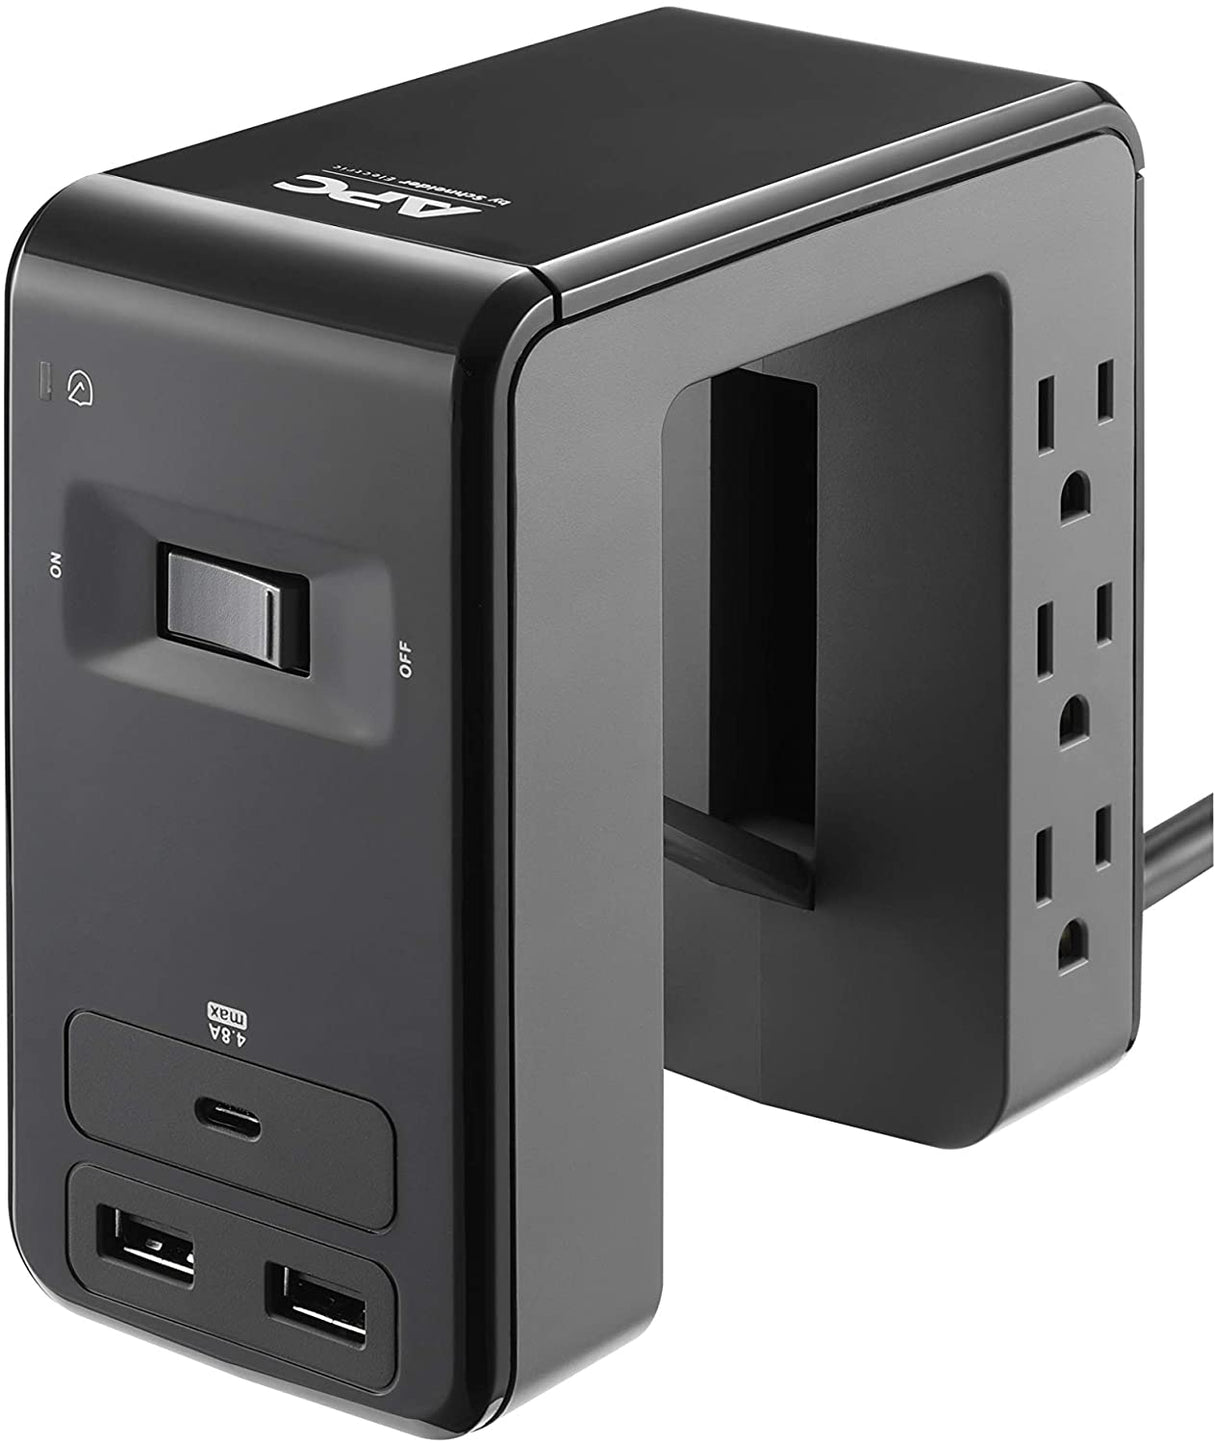 APC Desk Mount Power Station PE6U21, U-Shaped Surge Protector with USB Ports (3), Desk Clamp, 6 Outlet, 1080 Joules Black Black 3 USB Charging Ports (Type C &amp; Type A) Outlet